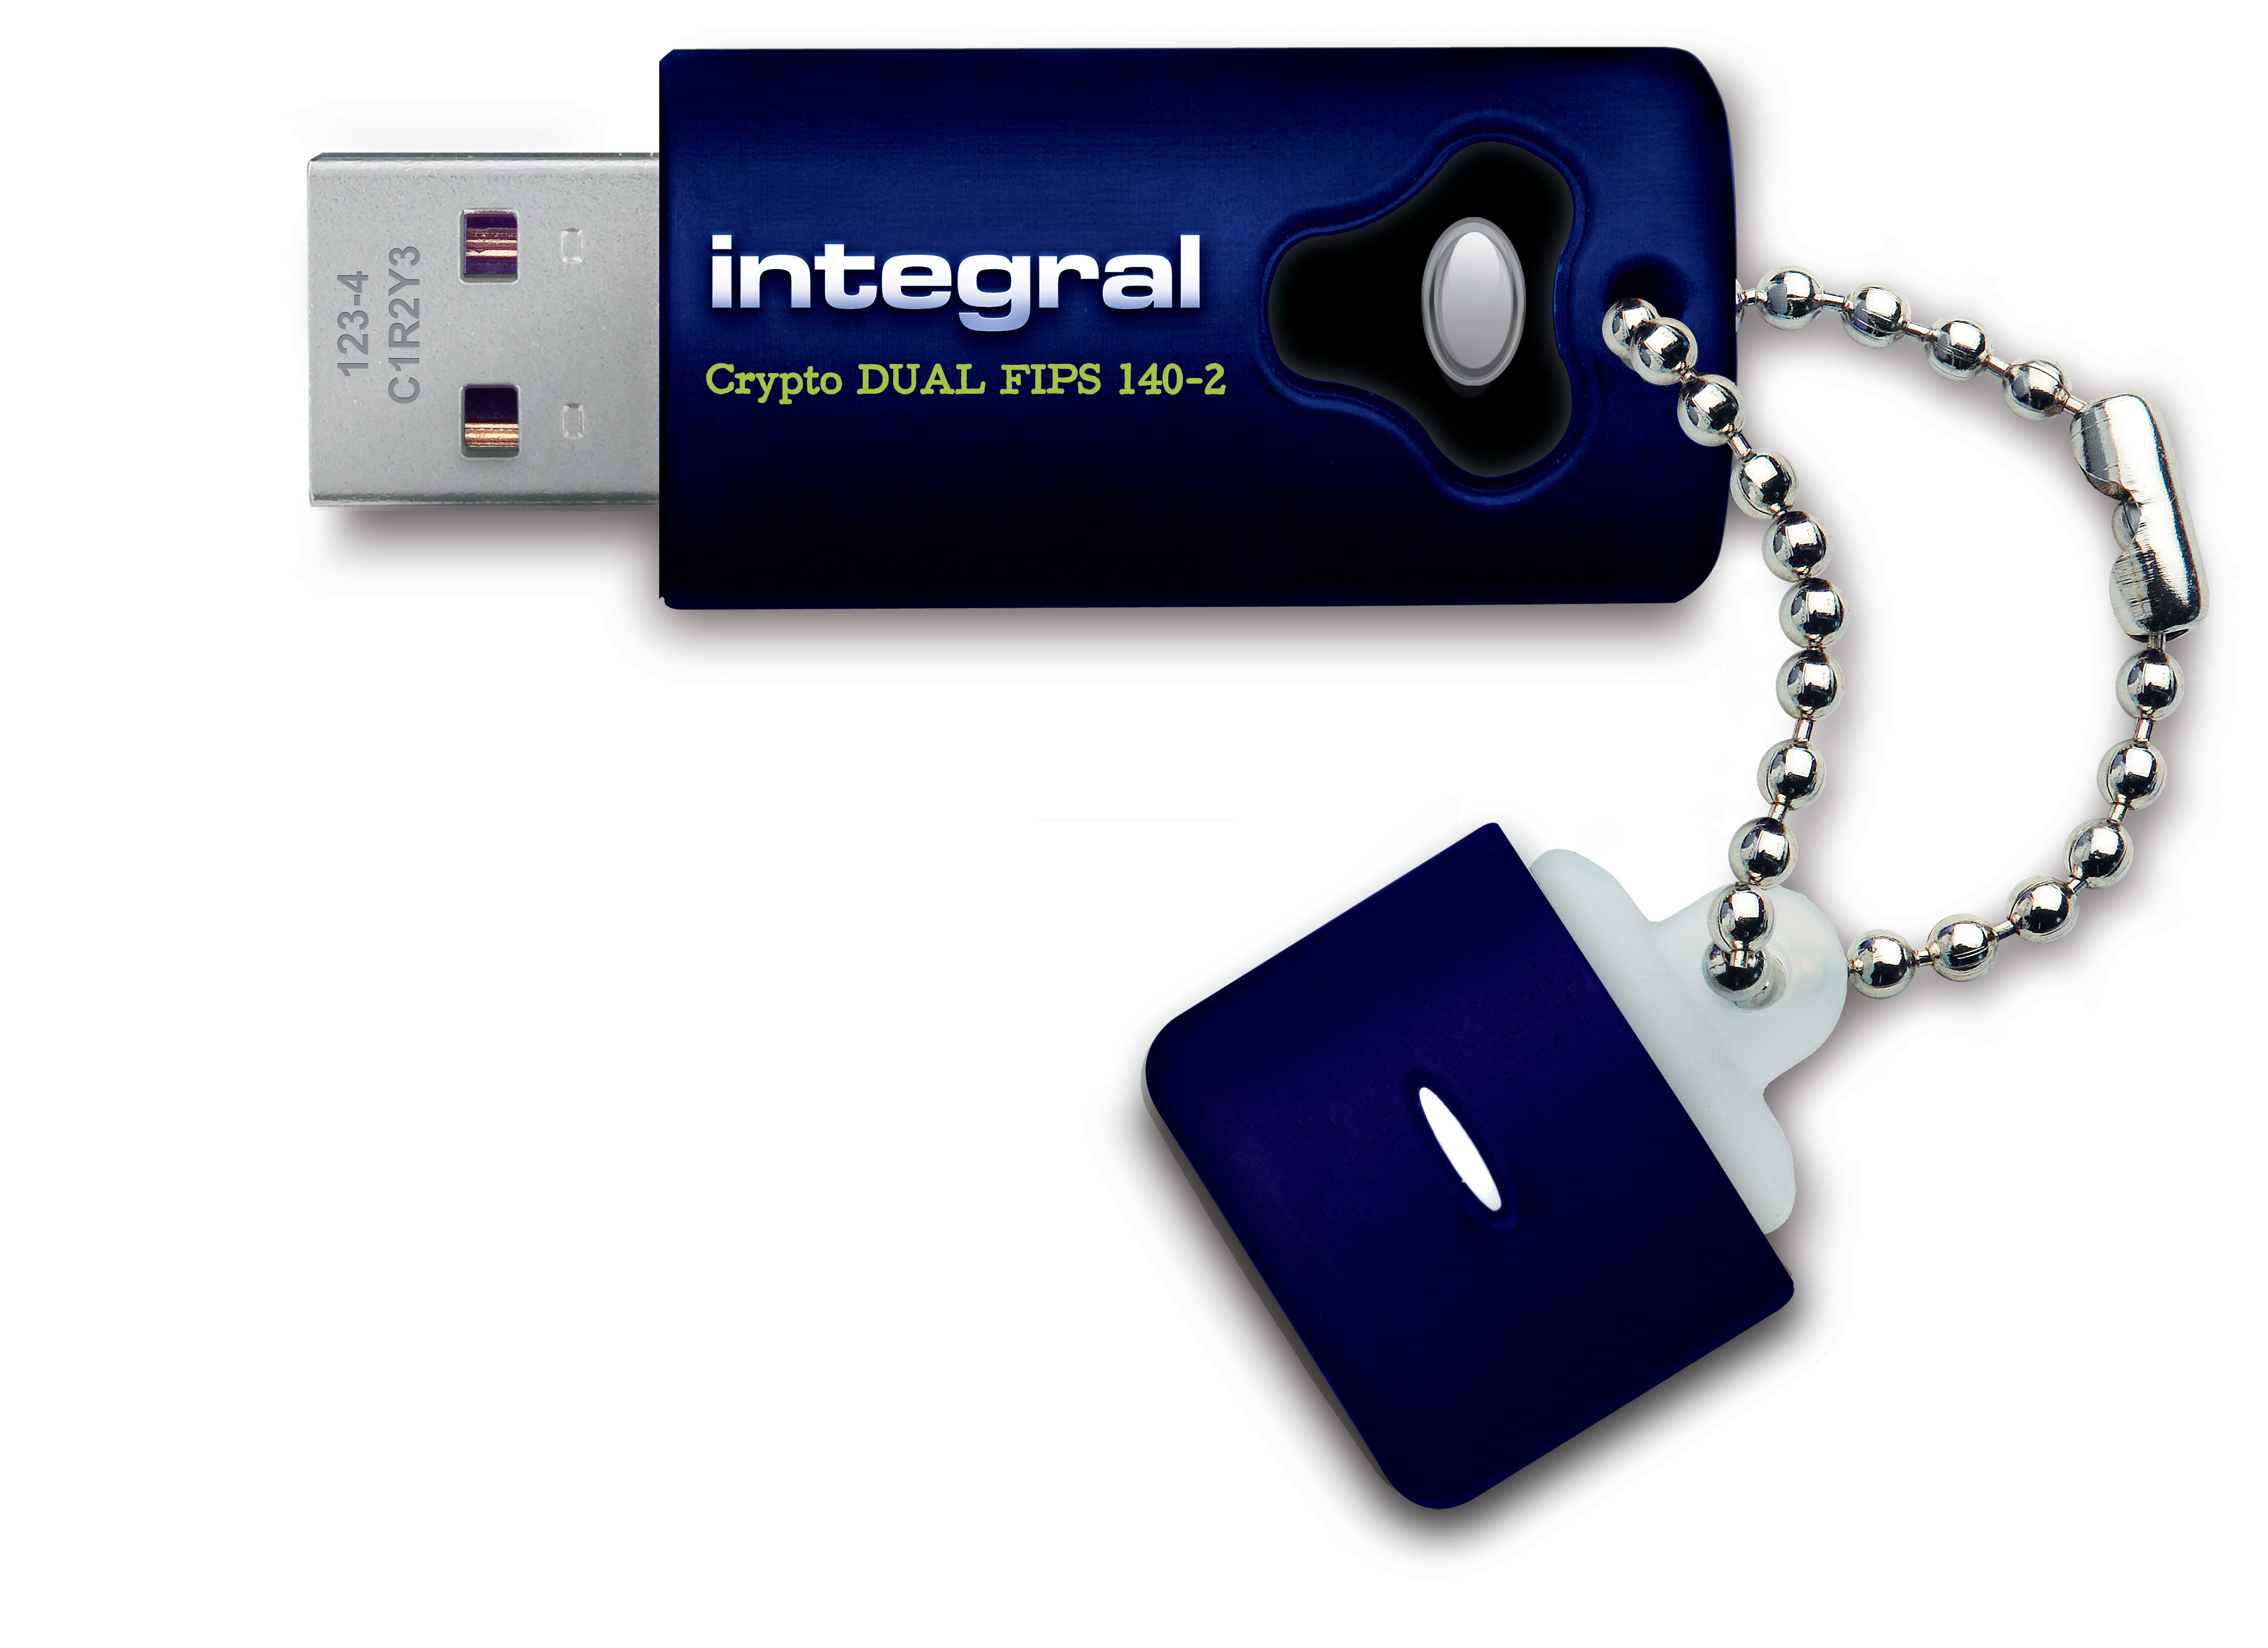 Integral 32GB Crypto Dual FIPS 140-2 Encrypted USB 3.0